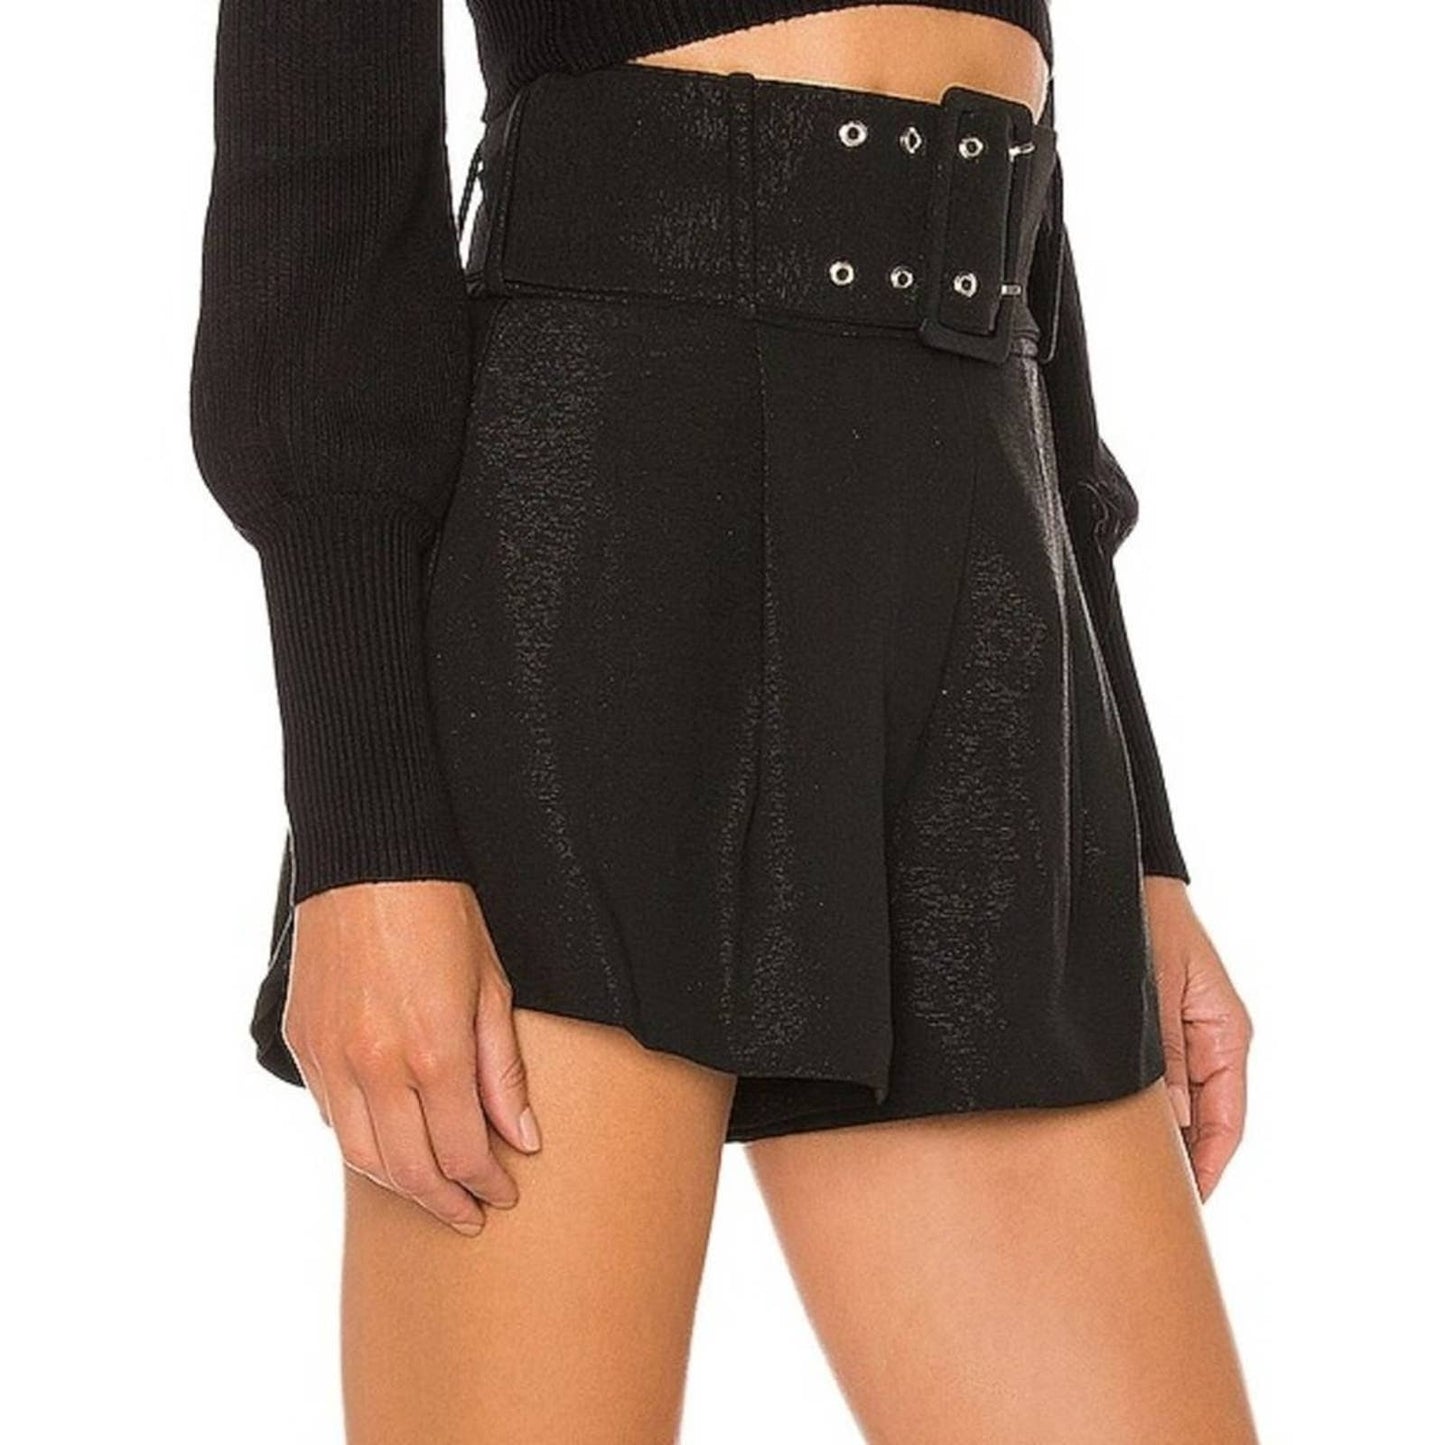 NBD Danny Shorts in Black Glitter NWOT Size Small